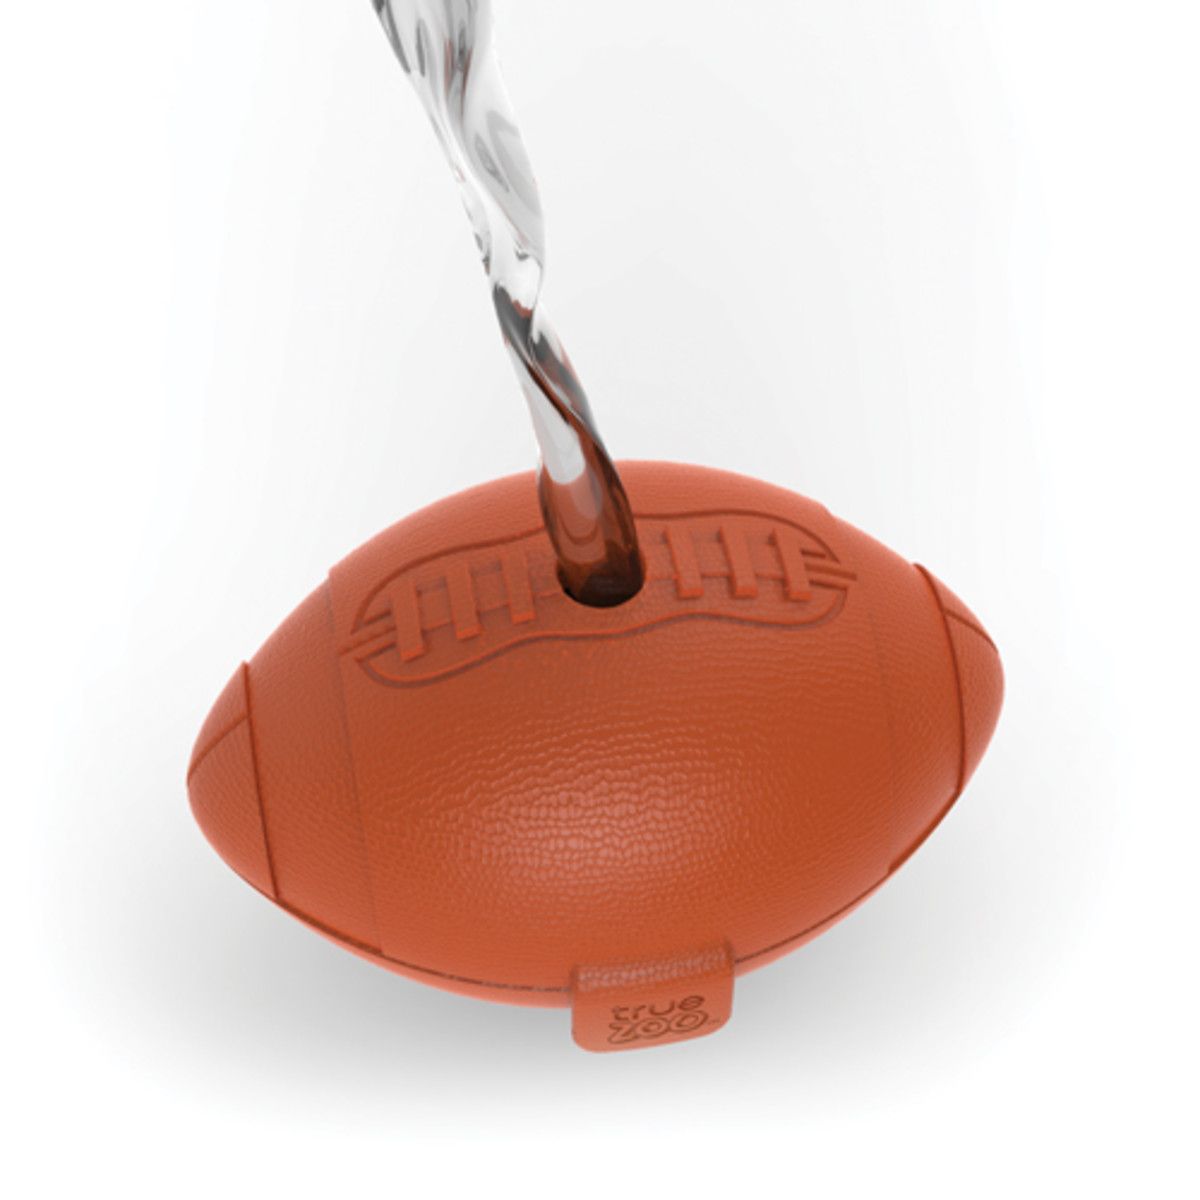 Sports Silicone Sphere Ice Mold